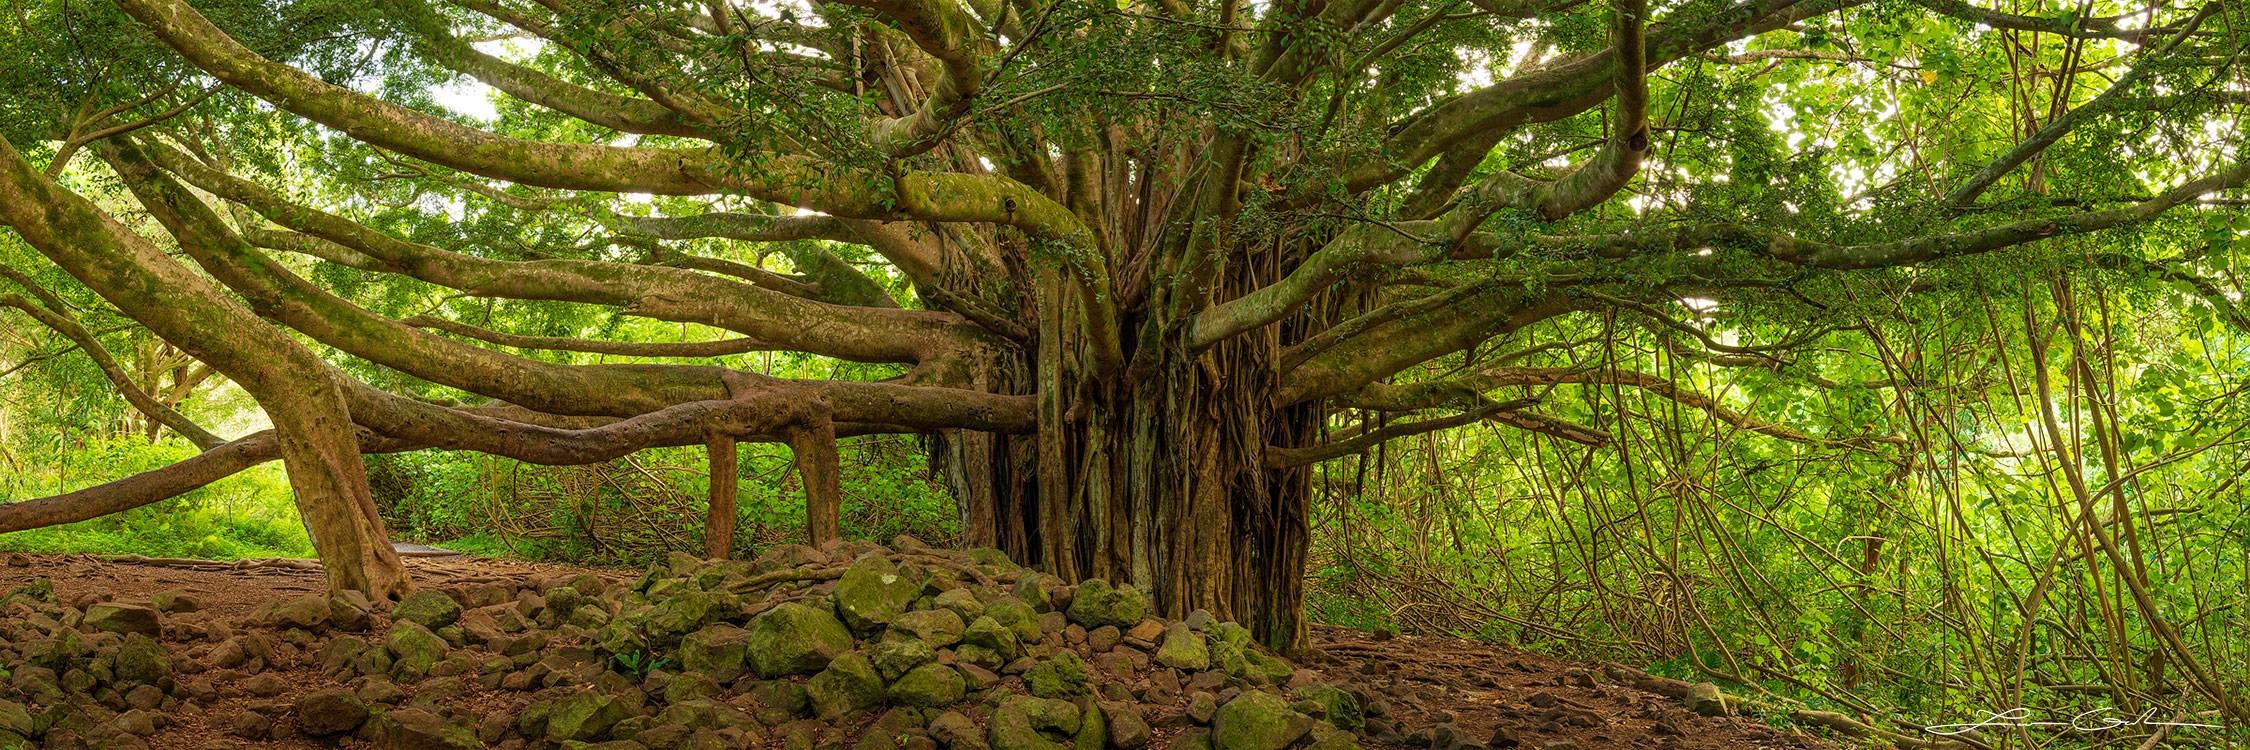 Fine art photo print of an ancient banyan tree in Maui, Hawaii with a broad, robust trunk and sprawling branches that form a lush green canopy against a serene backdrop. - Gintchin Fine Art